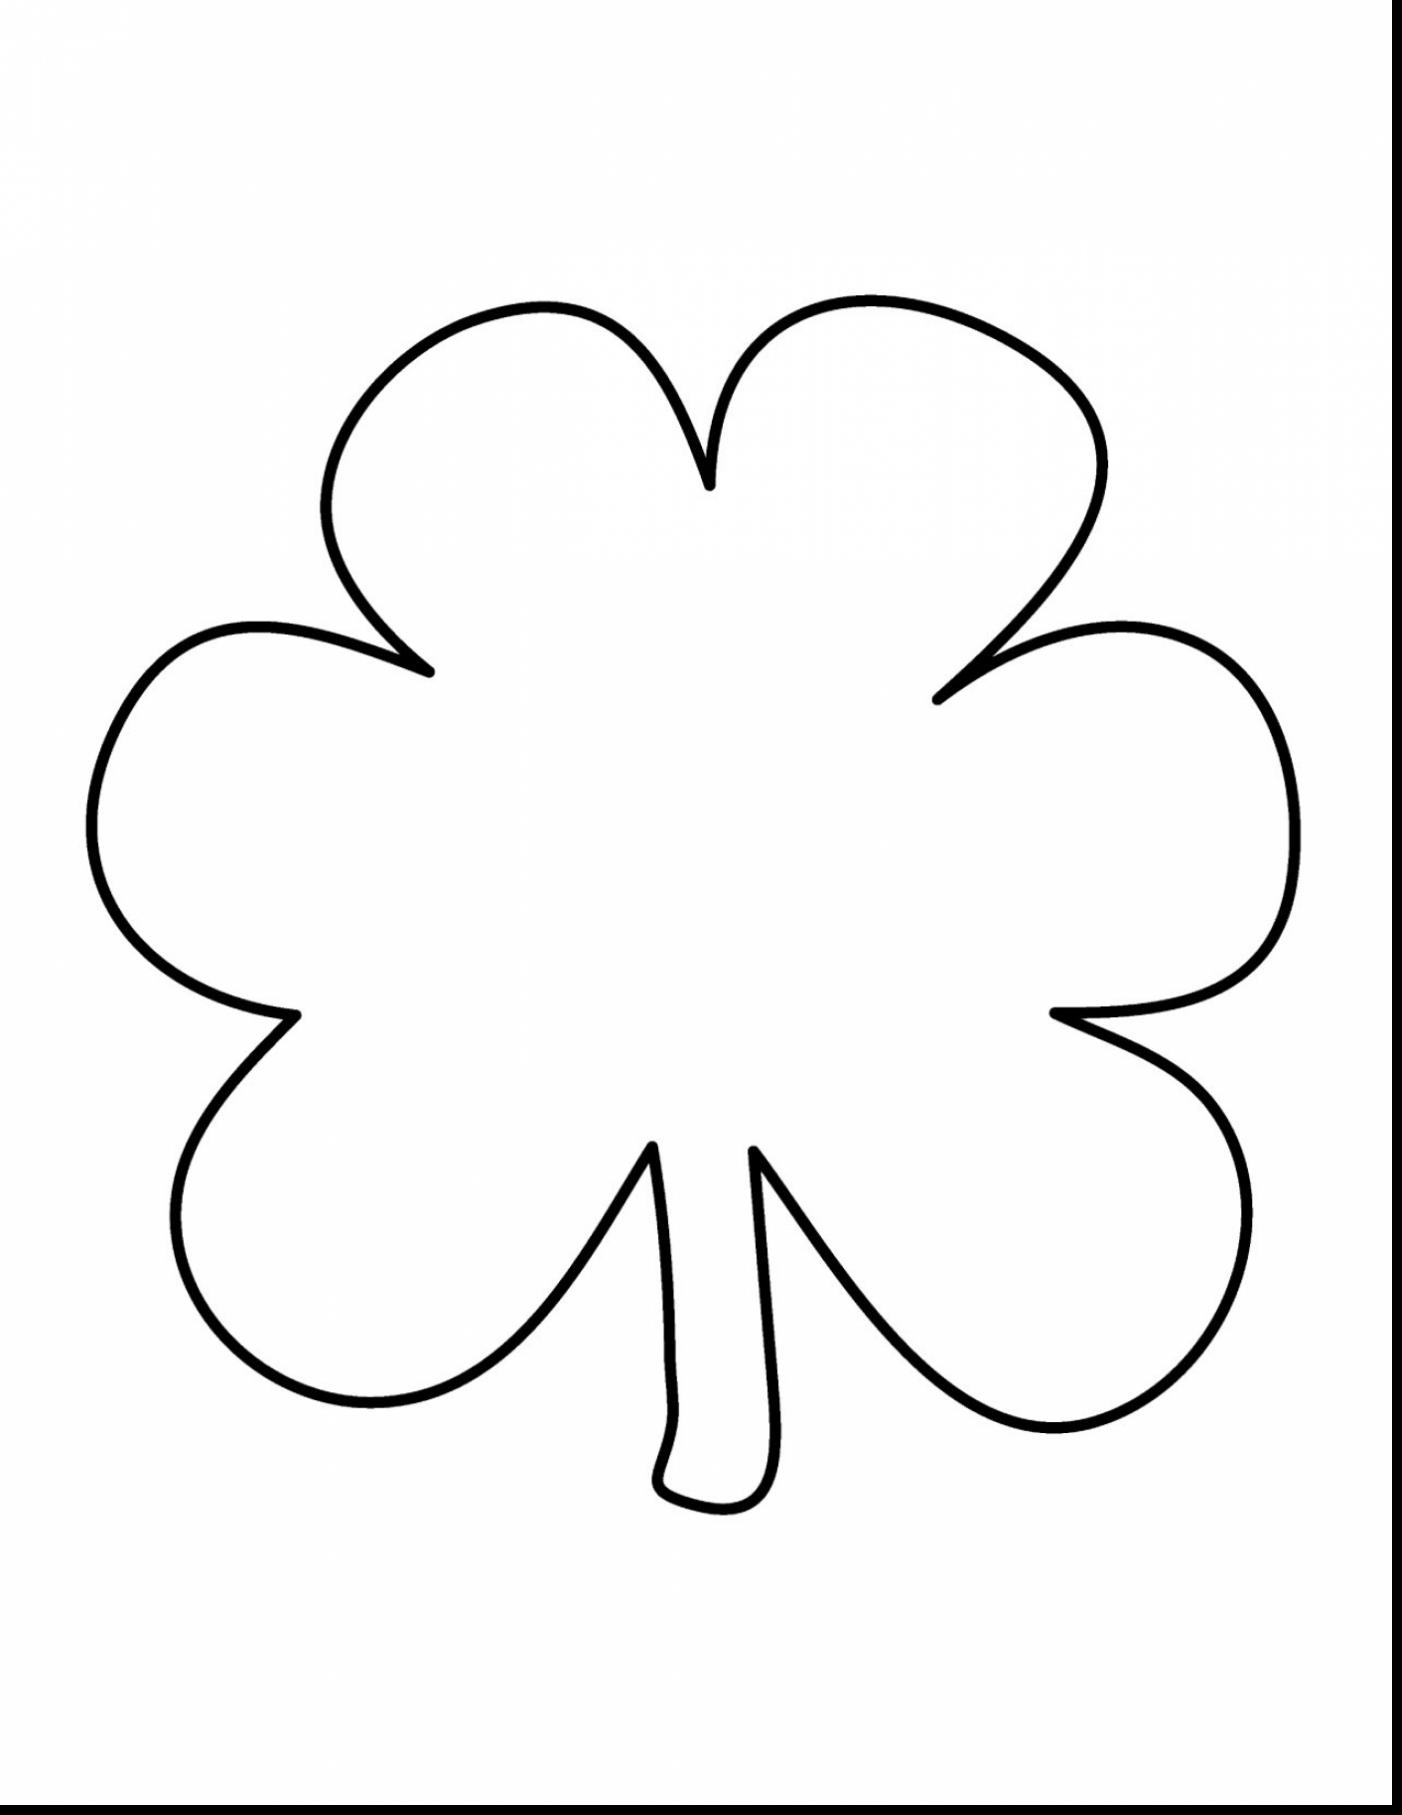 Surprising coloring page shamrock clip art with shamrock coloring